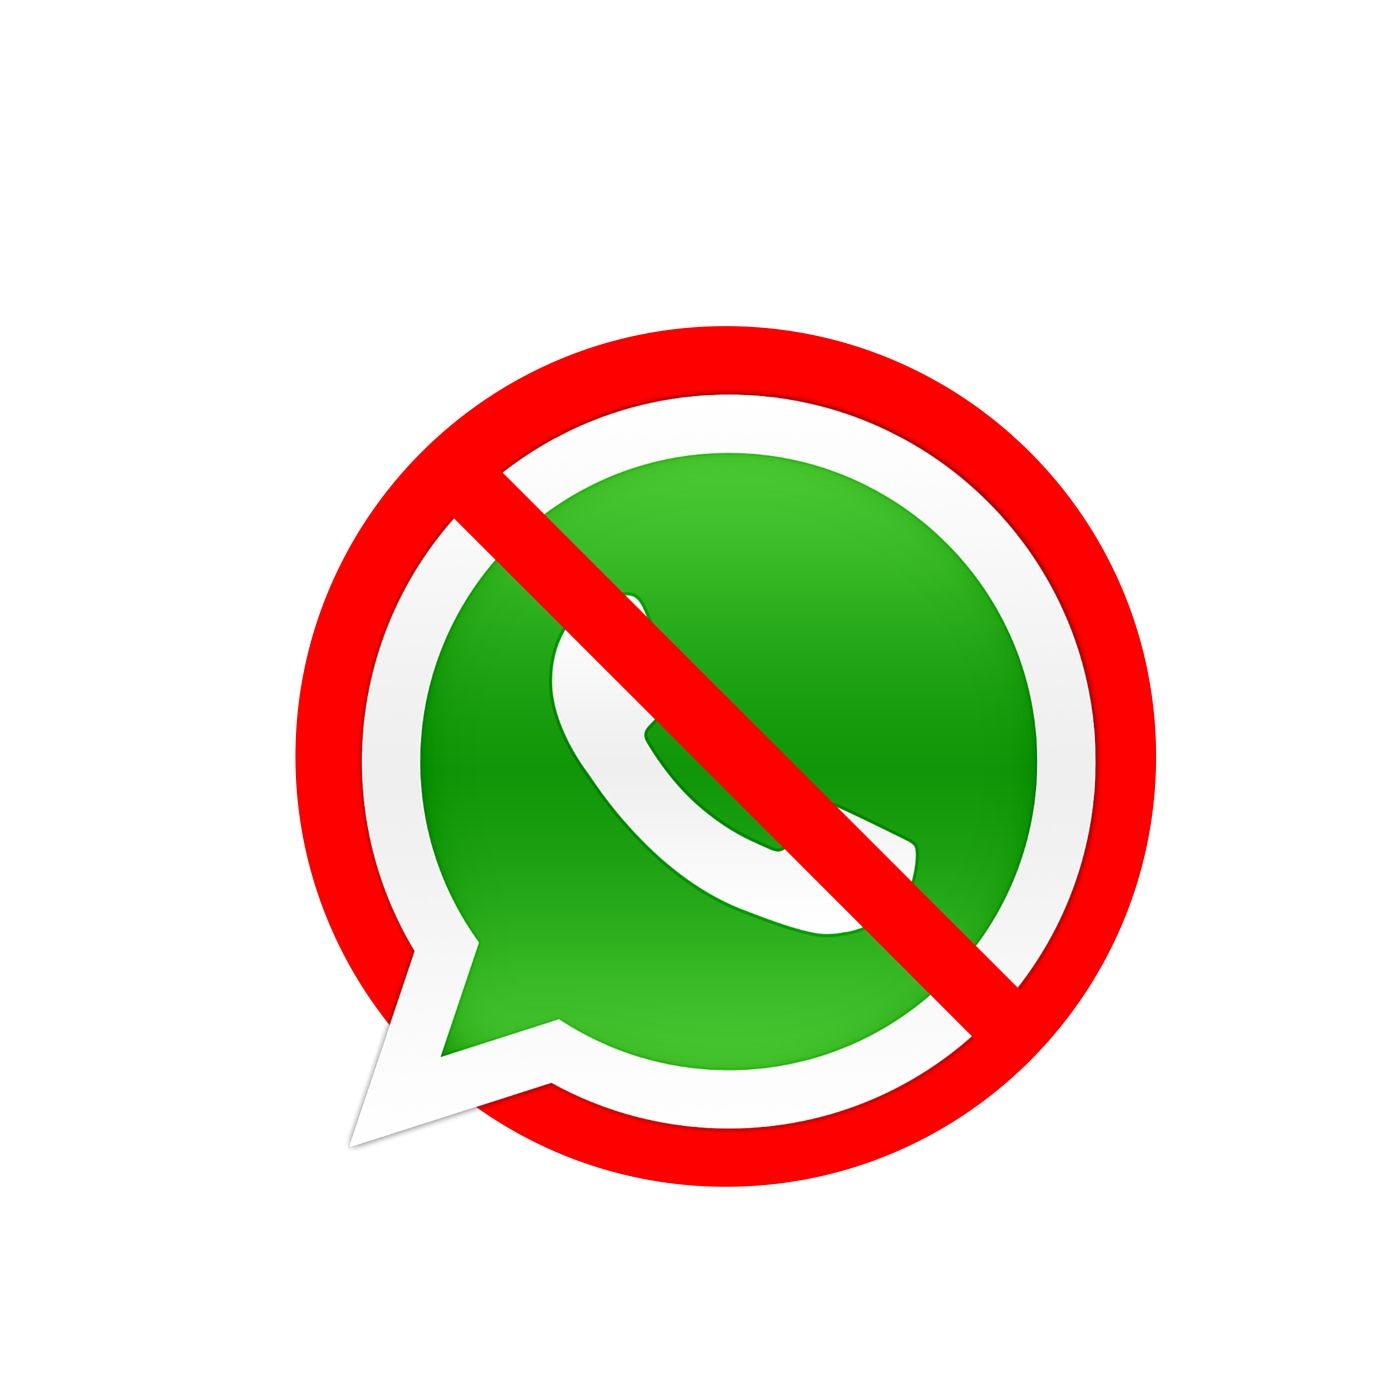 27: Mobile Service Providers In Africa Call For Regulation Of OTT Services Such As WhatsApp